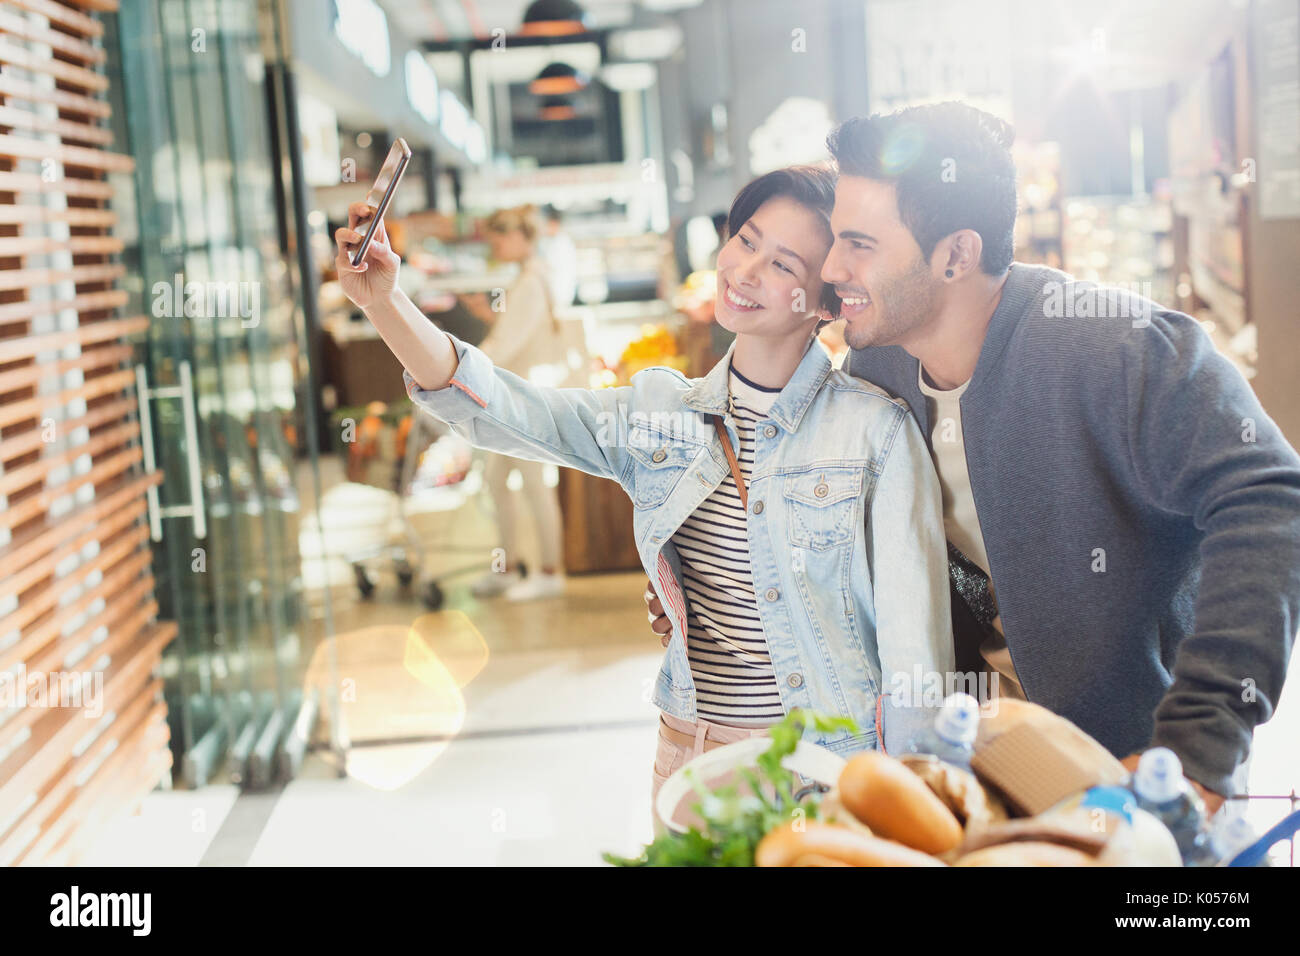 Young couple taking selfie grocery shopping in market Stock Photo